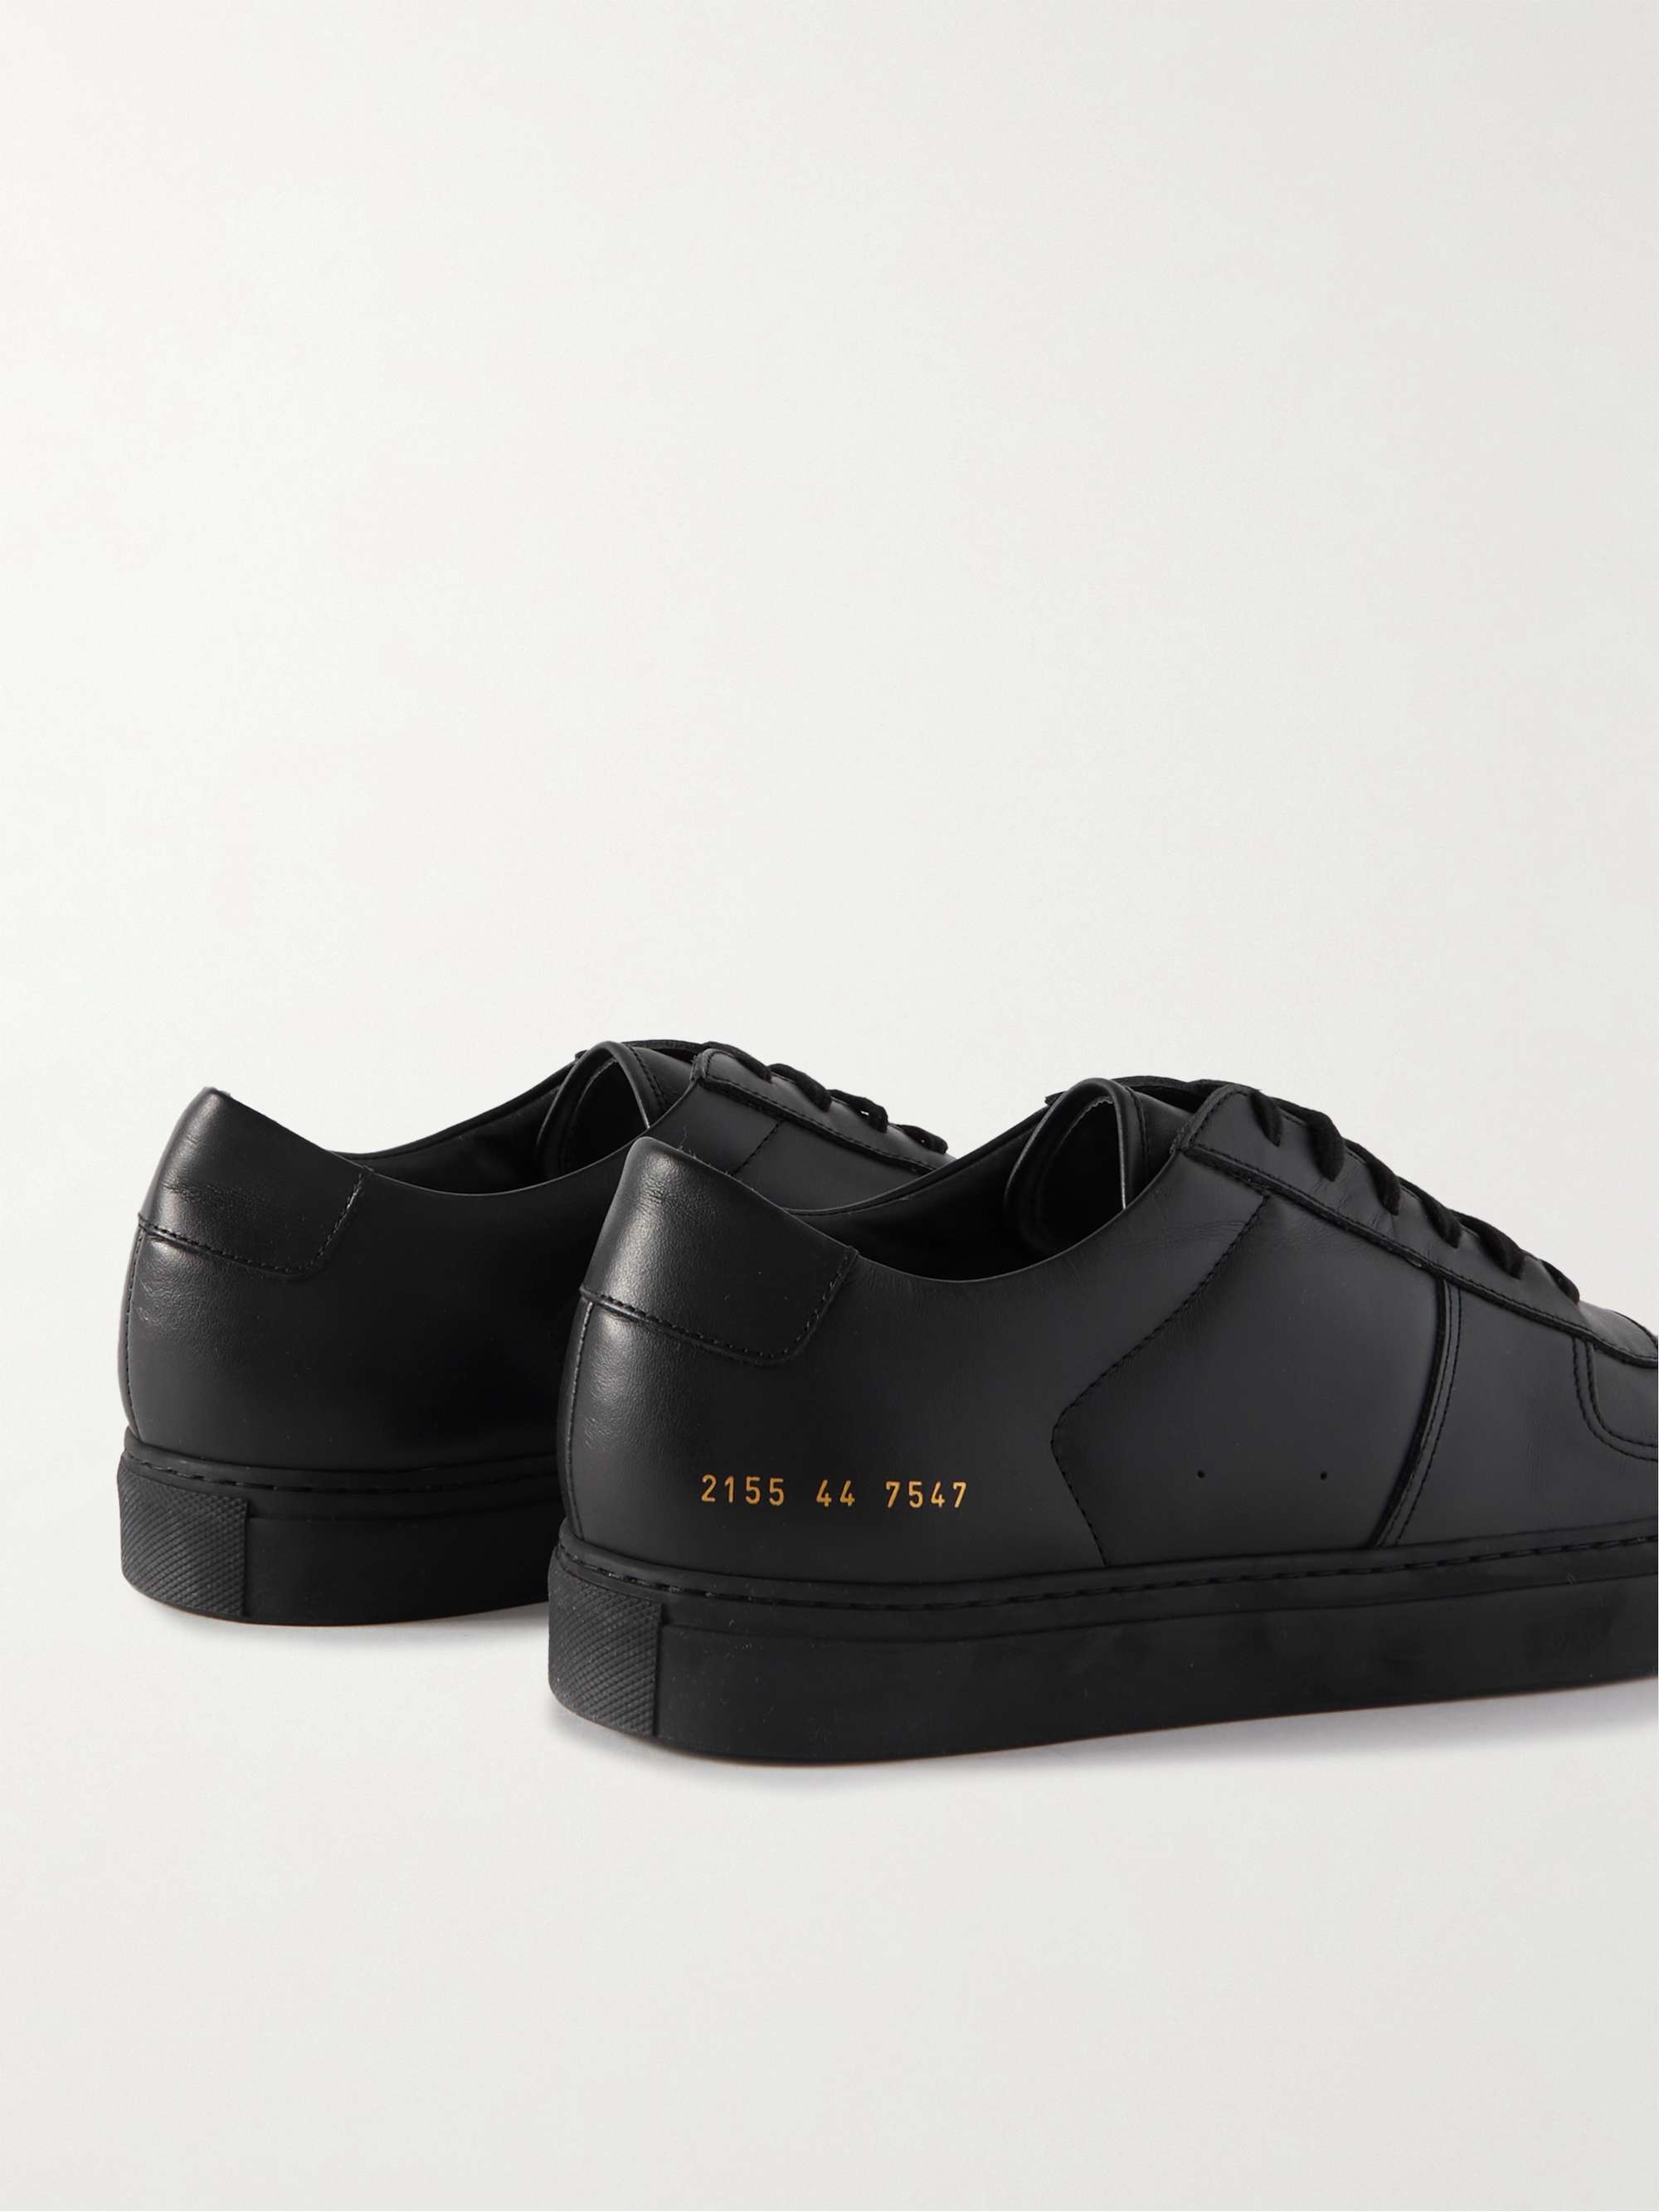 COMMON PROJECTS BBall Leather Sneakers